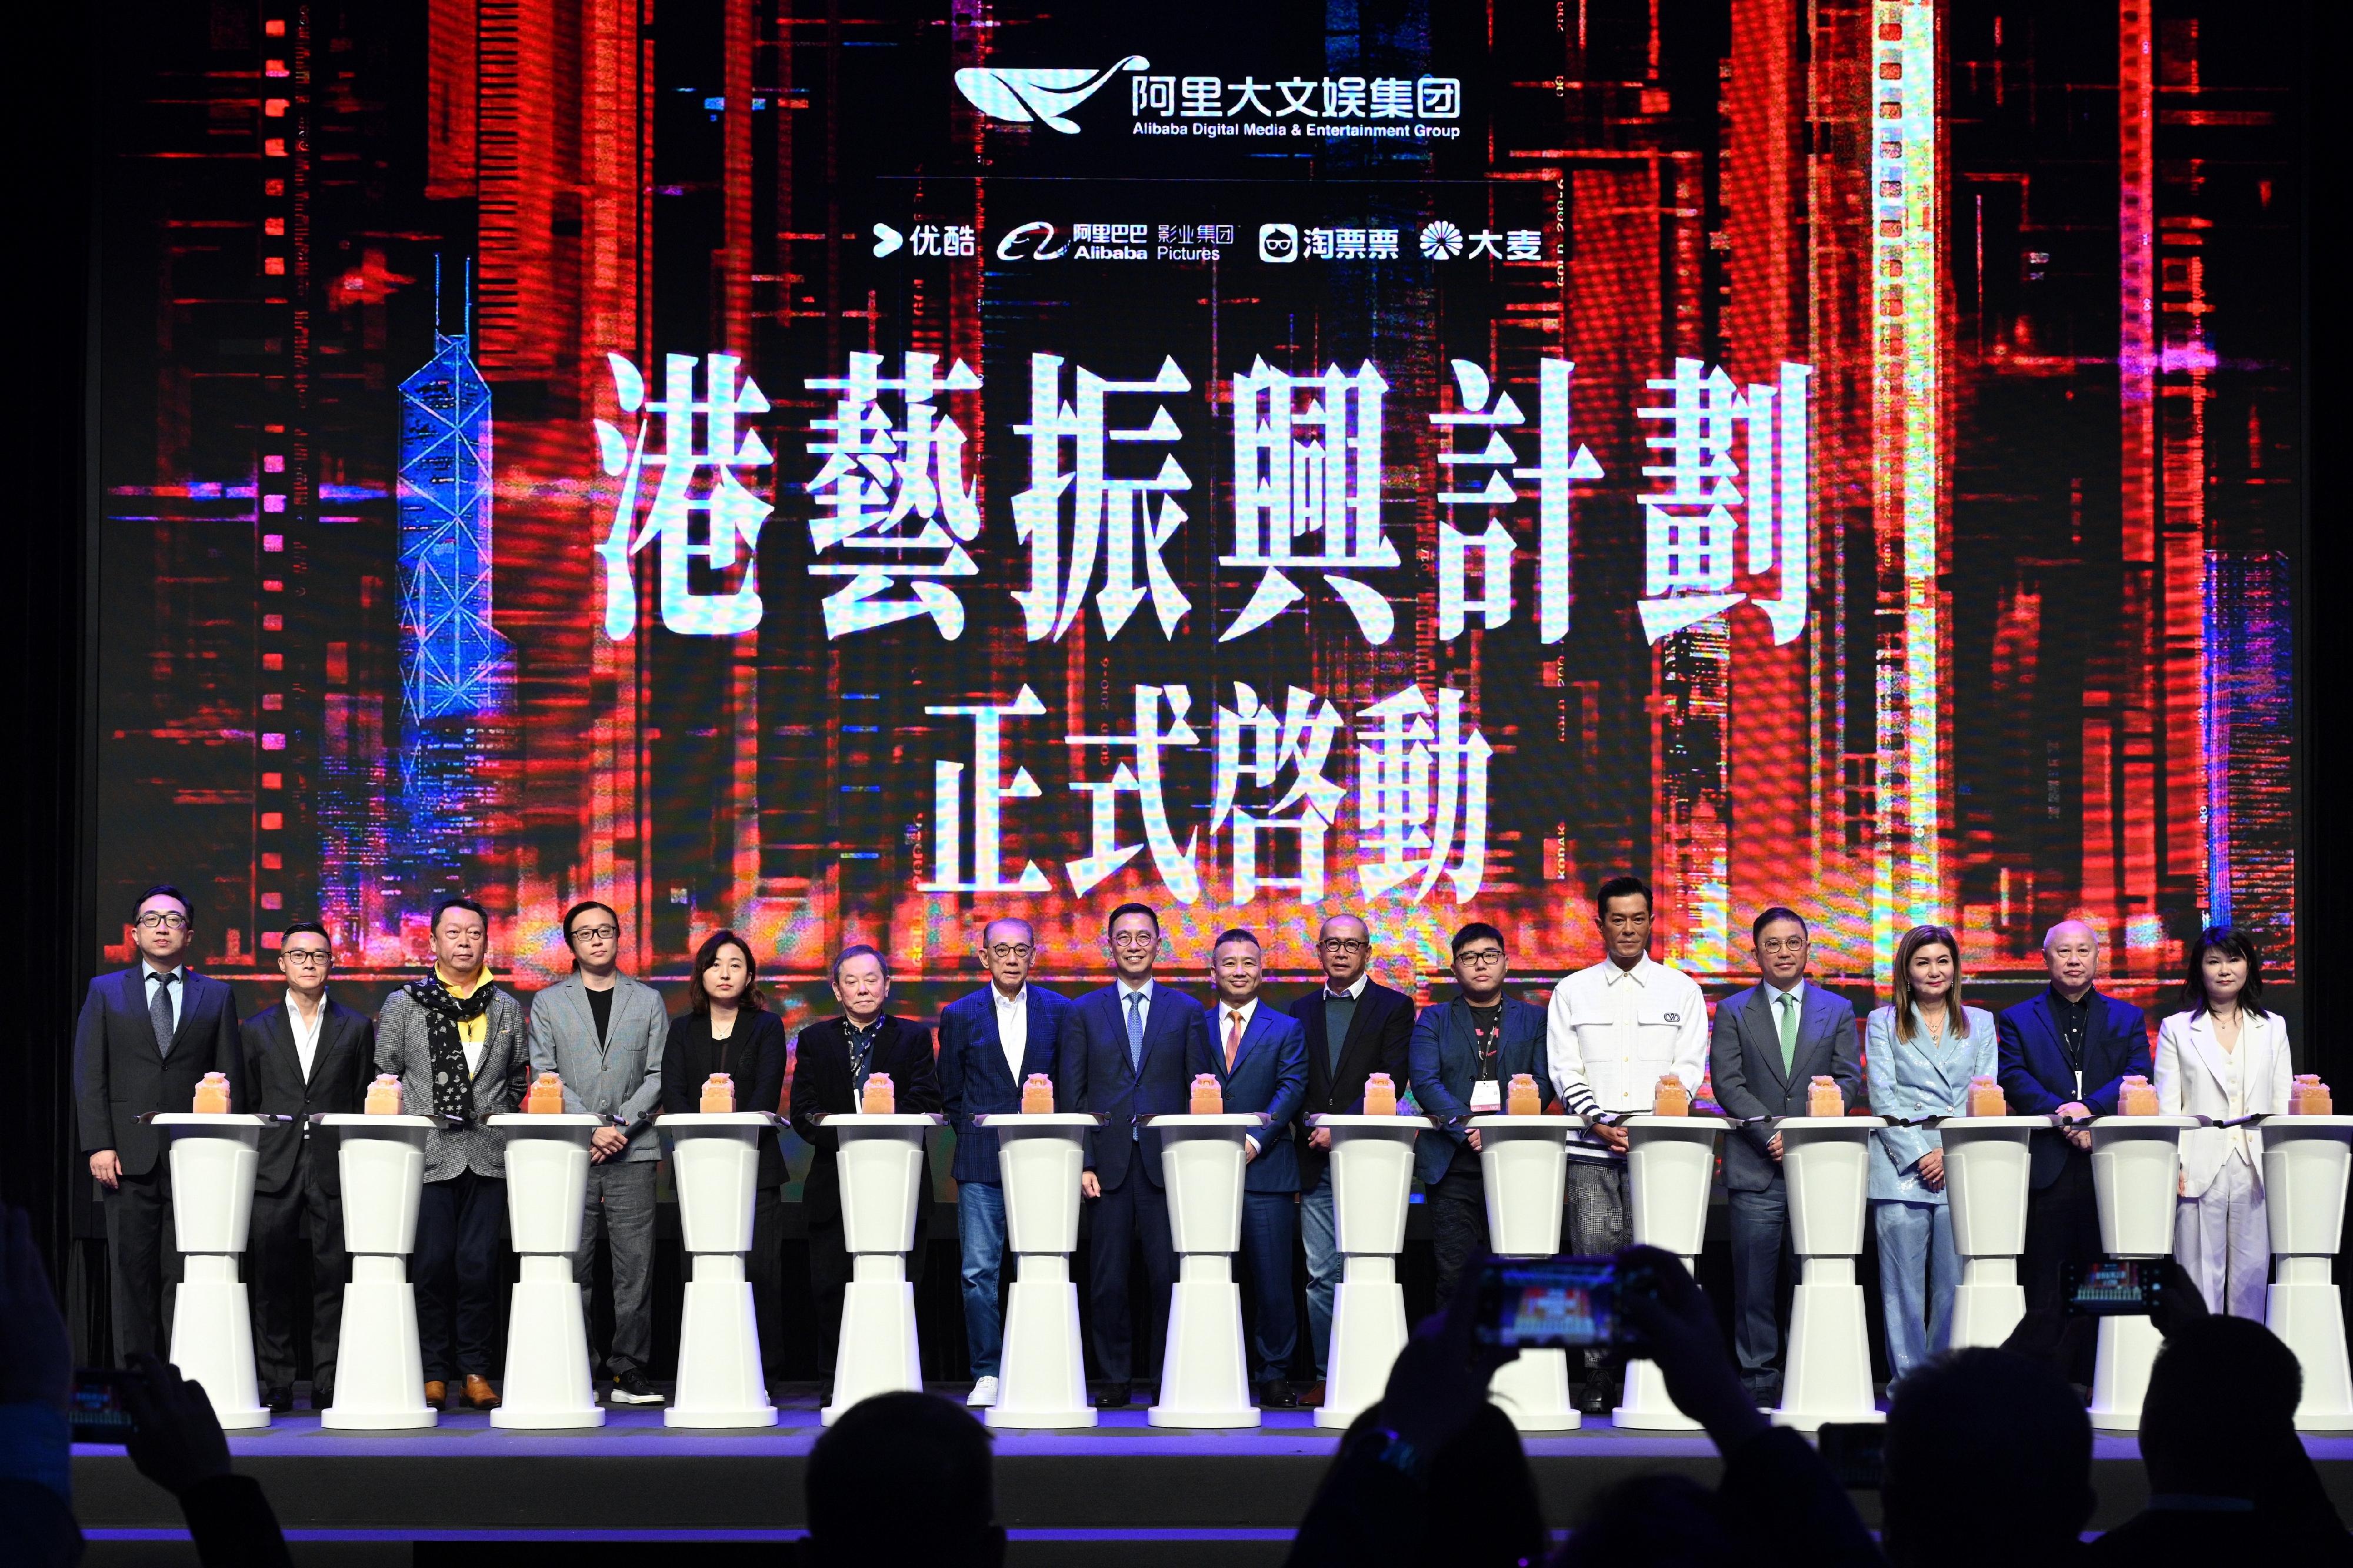 The Secretary for Culture, Sports and Tourism, Mr Kevin Yeung, attended the press conference for the Hong Kong Cultural and Art Industry Revitalisation Program by Alibaba Digital Media and Entertainment Group today (March 11). Officiating guests included Mr Yeung (eighth left); the Chairman and Chief Executive Officer of Alibaba DME Group, Mr Fan Luyuan (eighth right); the President and Executive Director of Alibaba Pictures, Mr Jerry Li (first left), and the other representatives of the film industry.